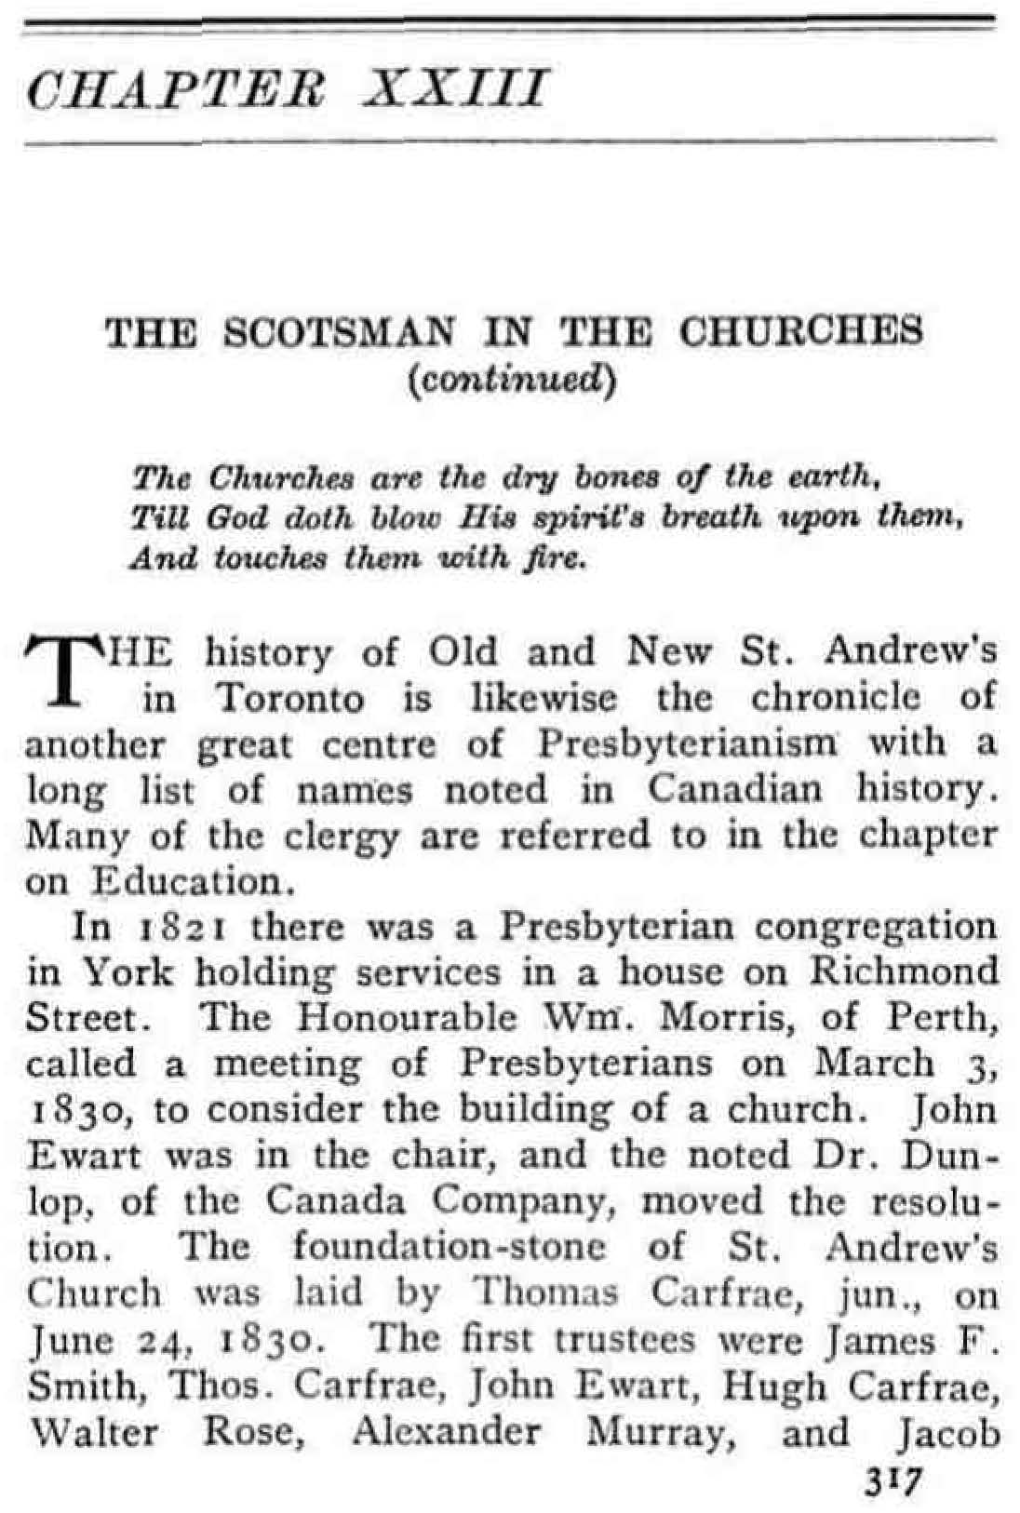 The Scotsman in the Churches